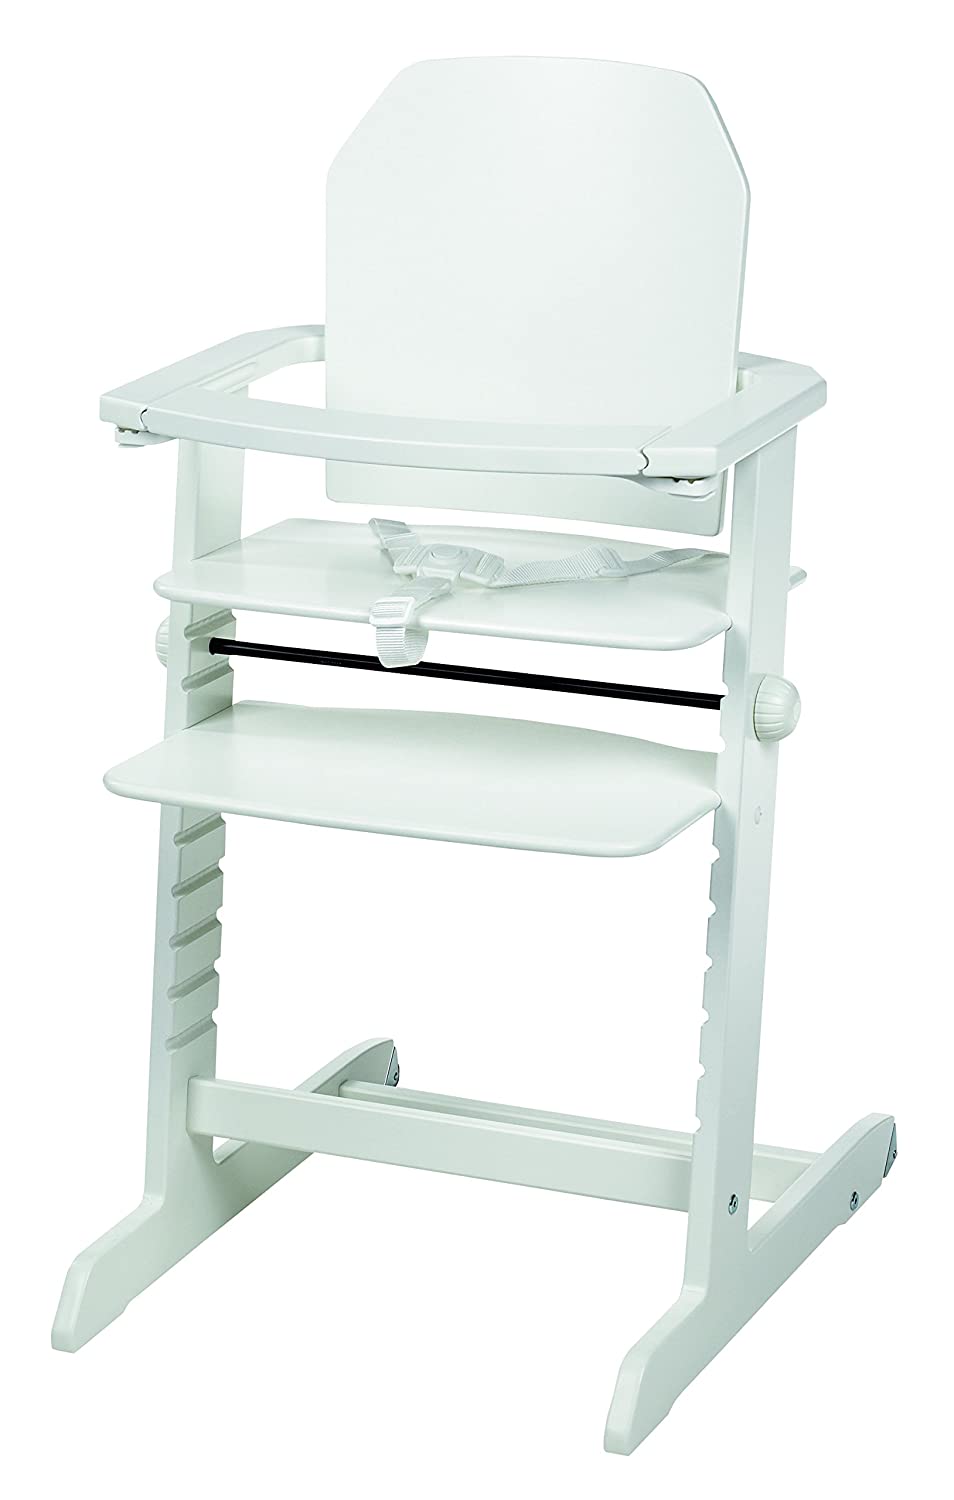 Geuther Highchair scalable Magical White